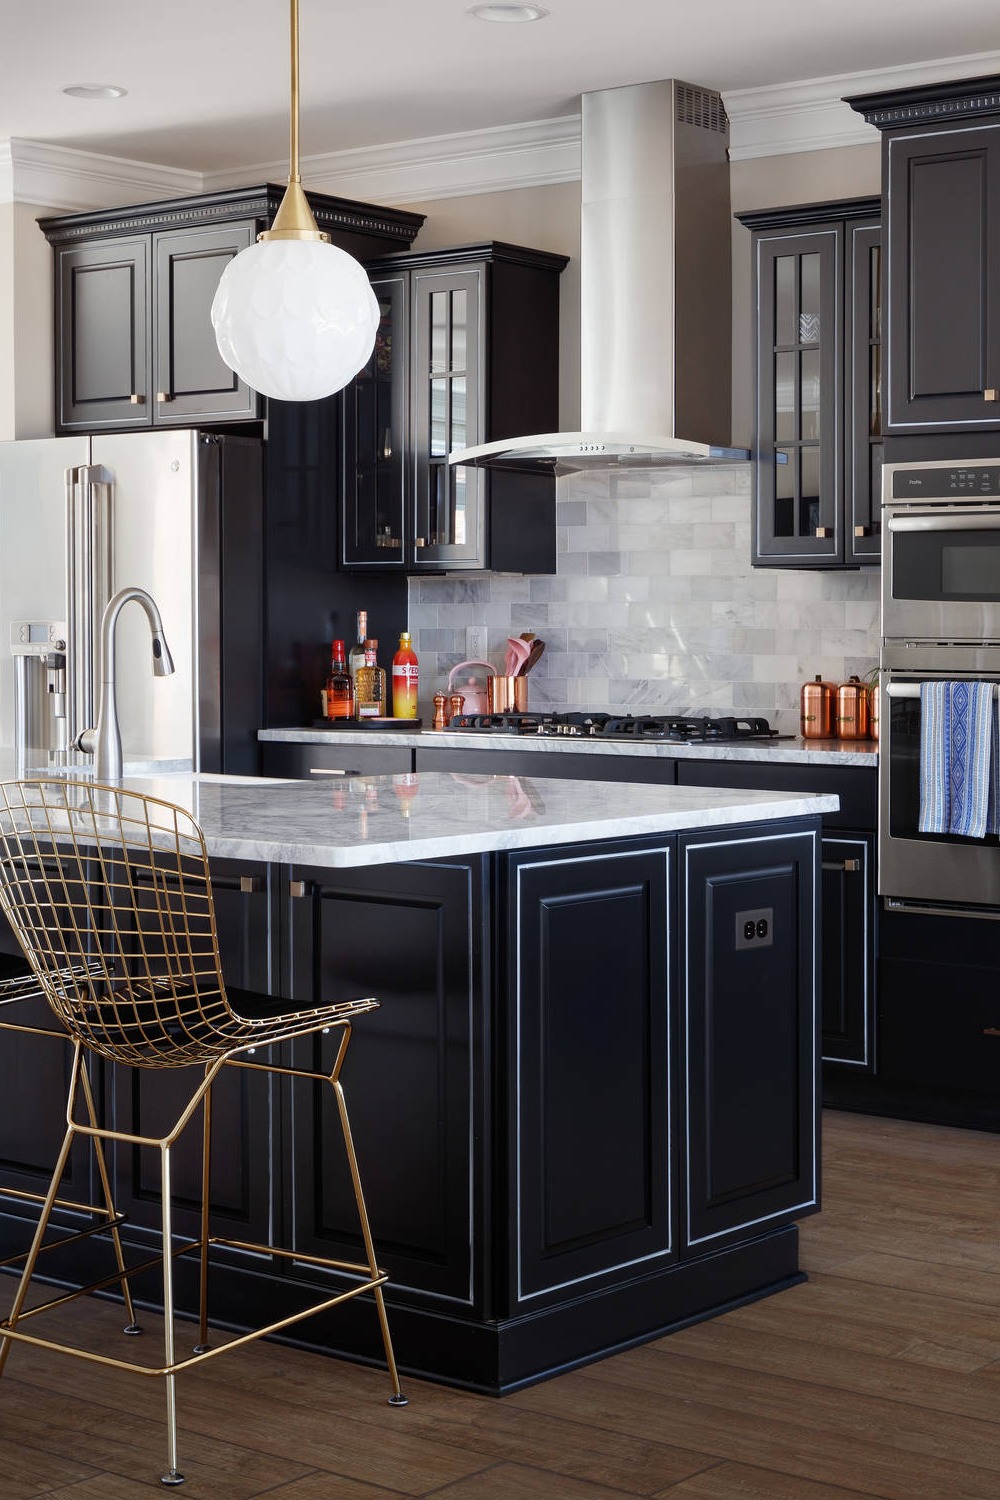 Dark Wood Cabinets White Accents Timeless Appeal Marble White Backsplash With Dark Cabinets Subway Tile Brown Floor